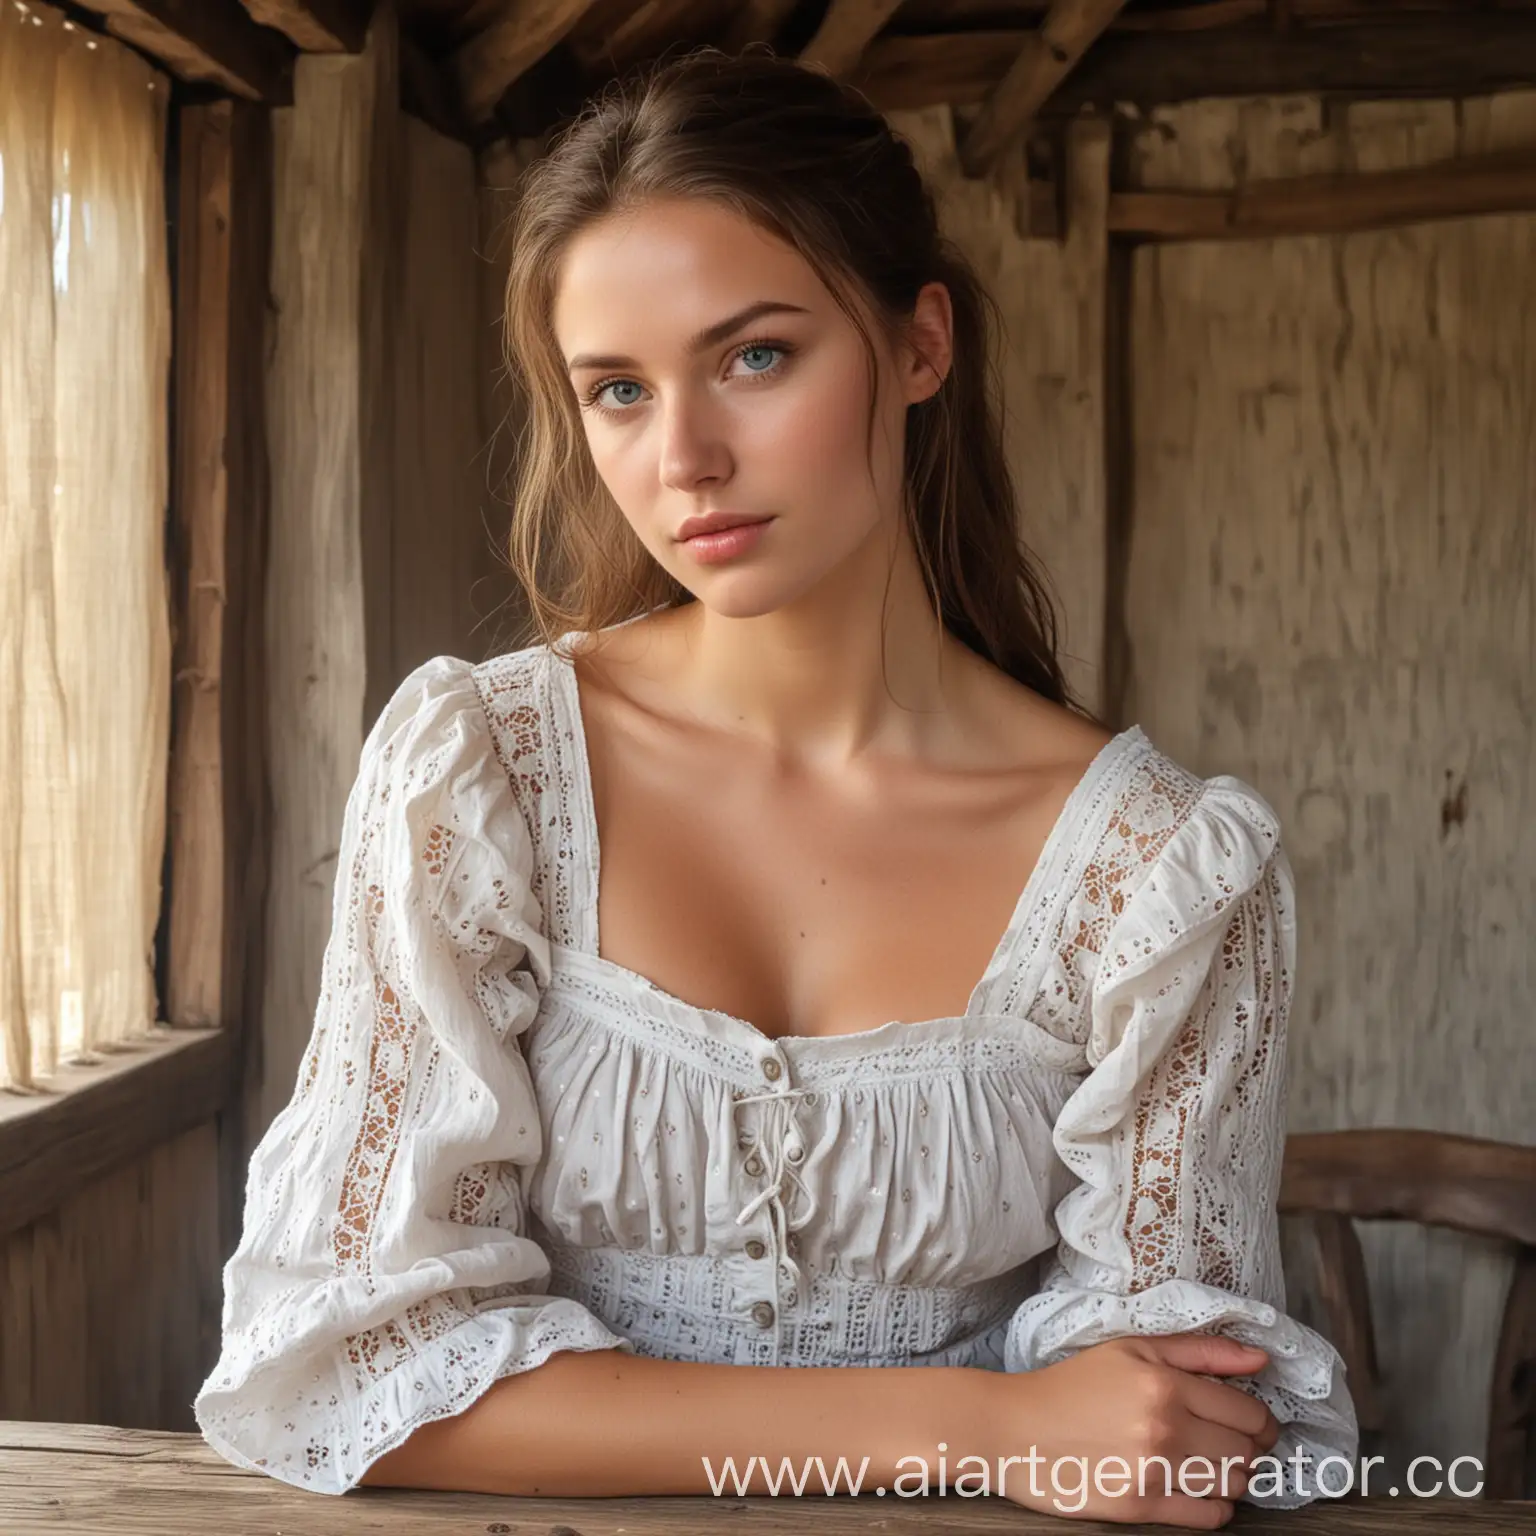 Young-Peasant-Woman-in-a-Simple-Dress-at-a-Shabby-Hut